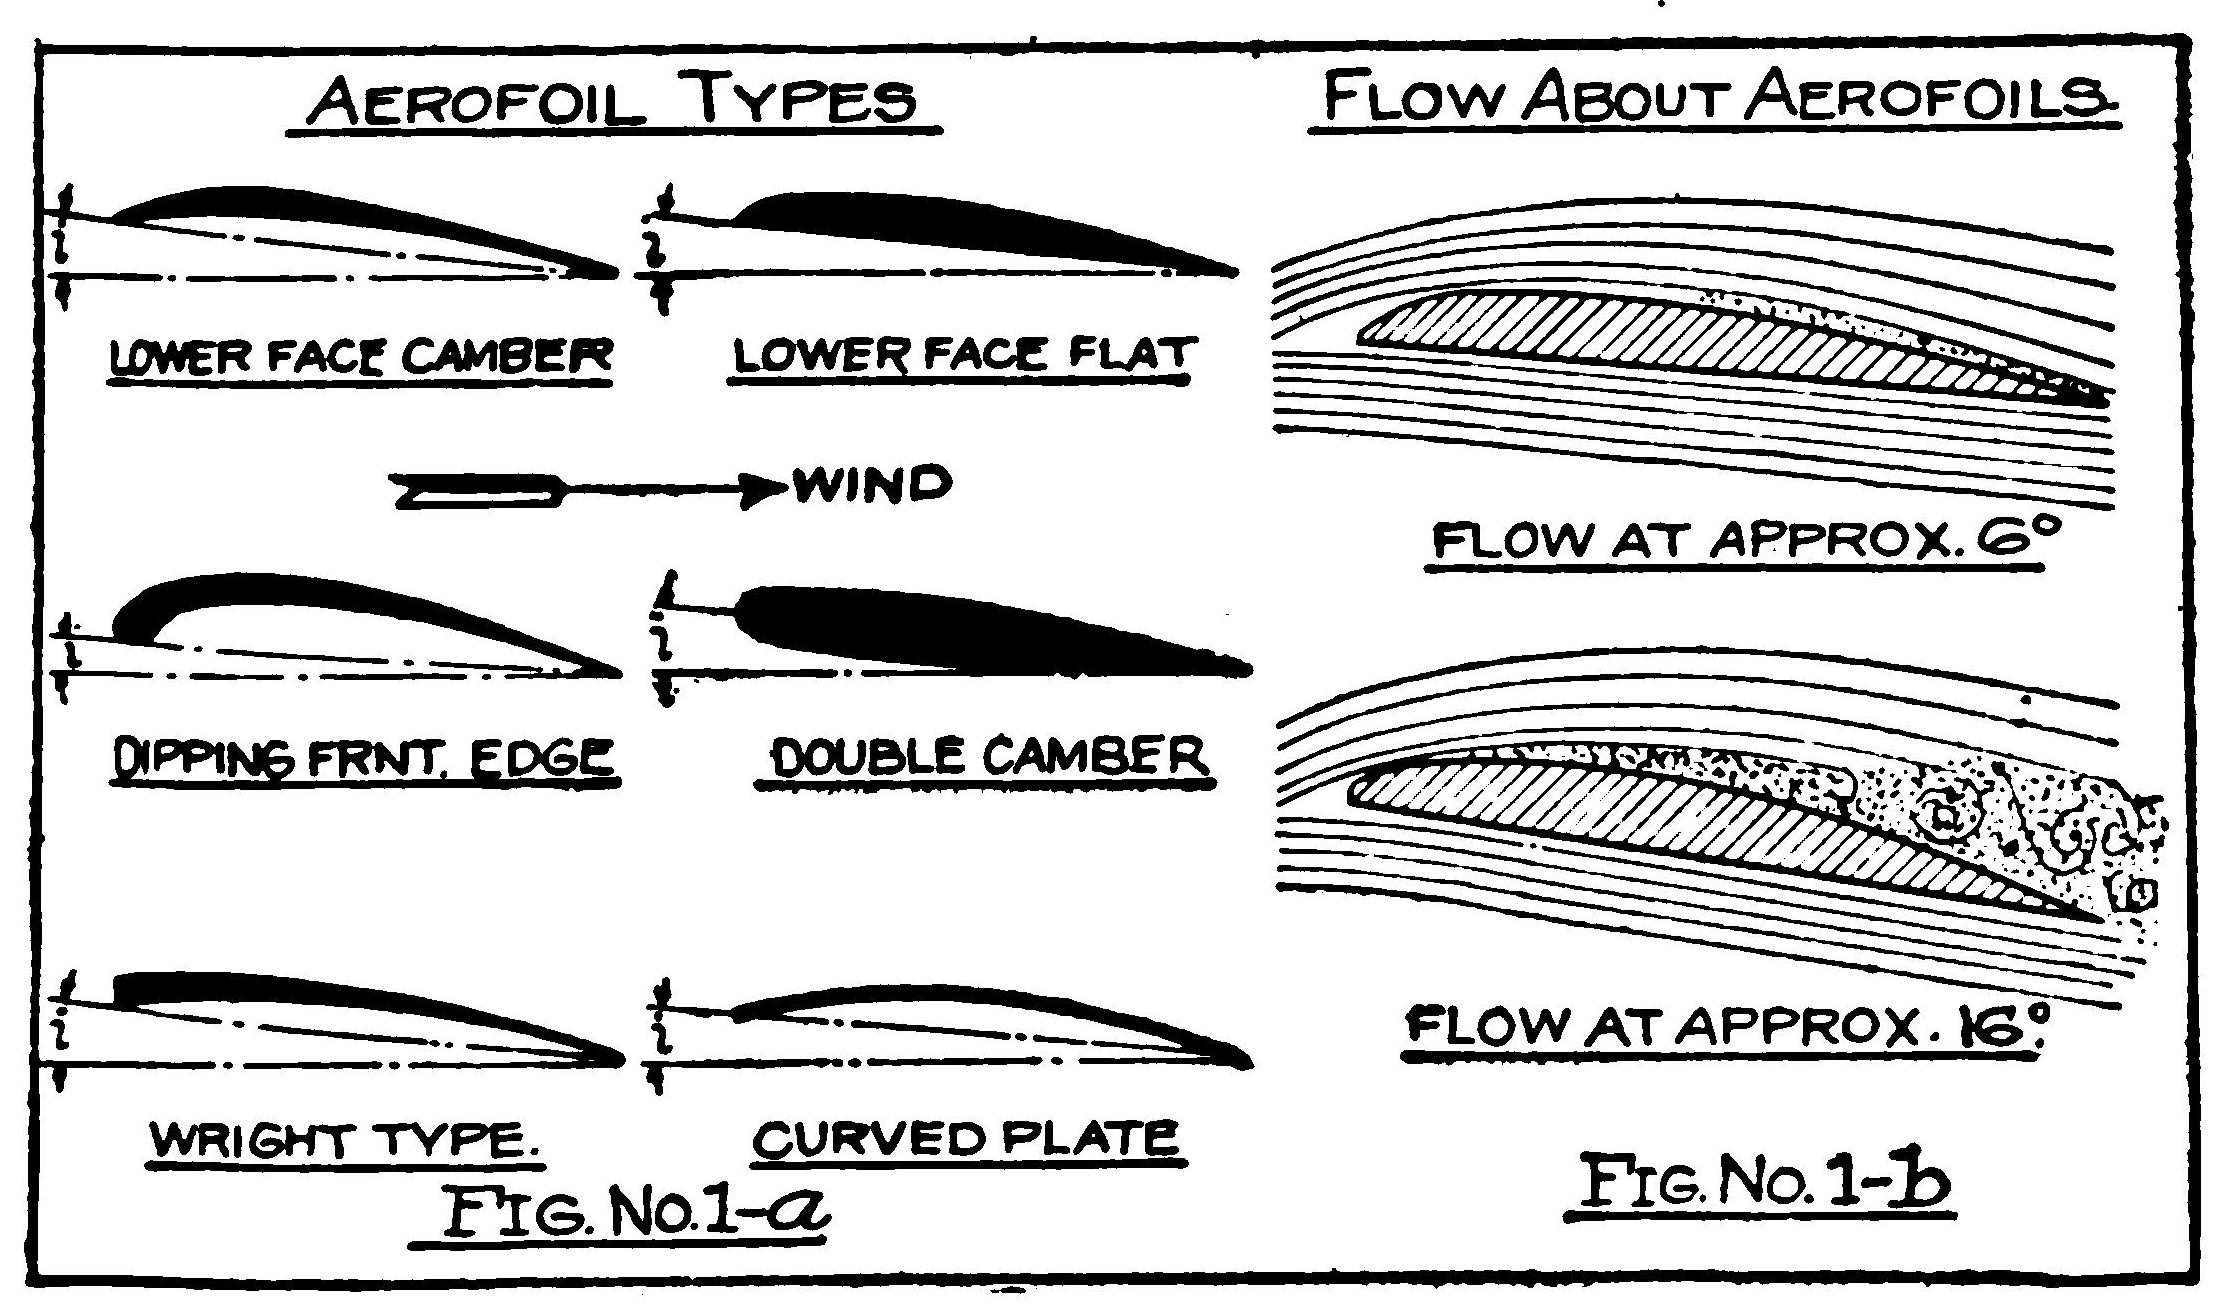 Figs. 1a, 1b. Aerofoil Types and Flow at Different Angles.